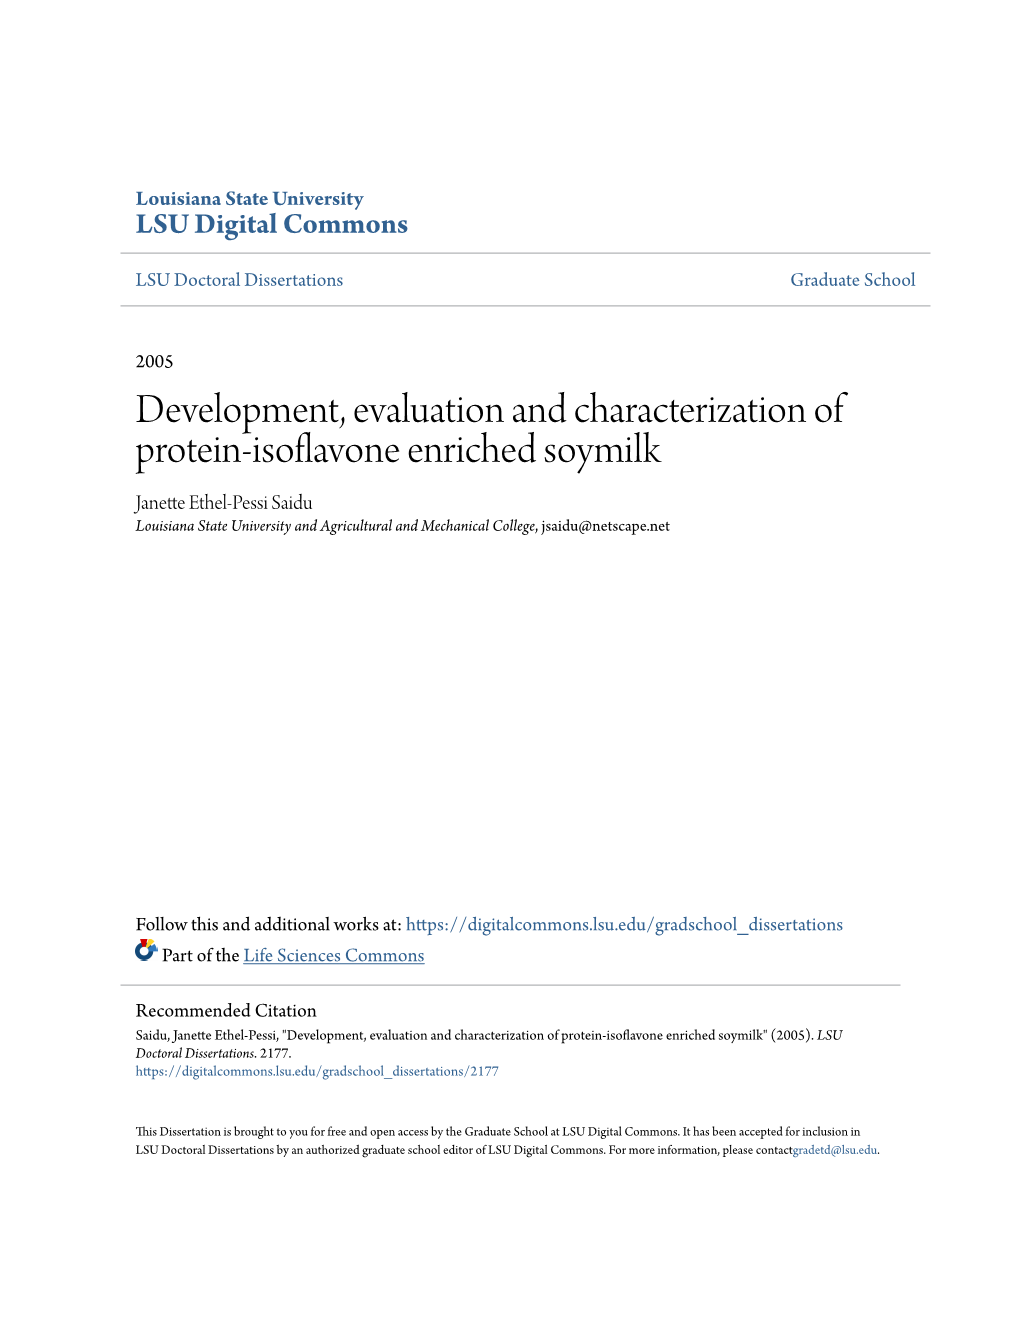 Development, Evaluation and Characterization of Protein